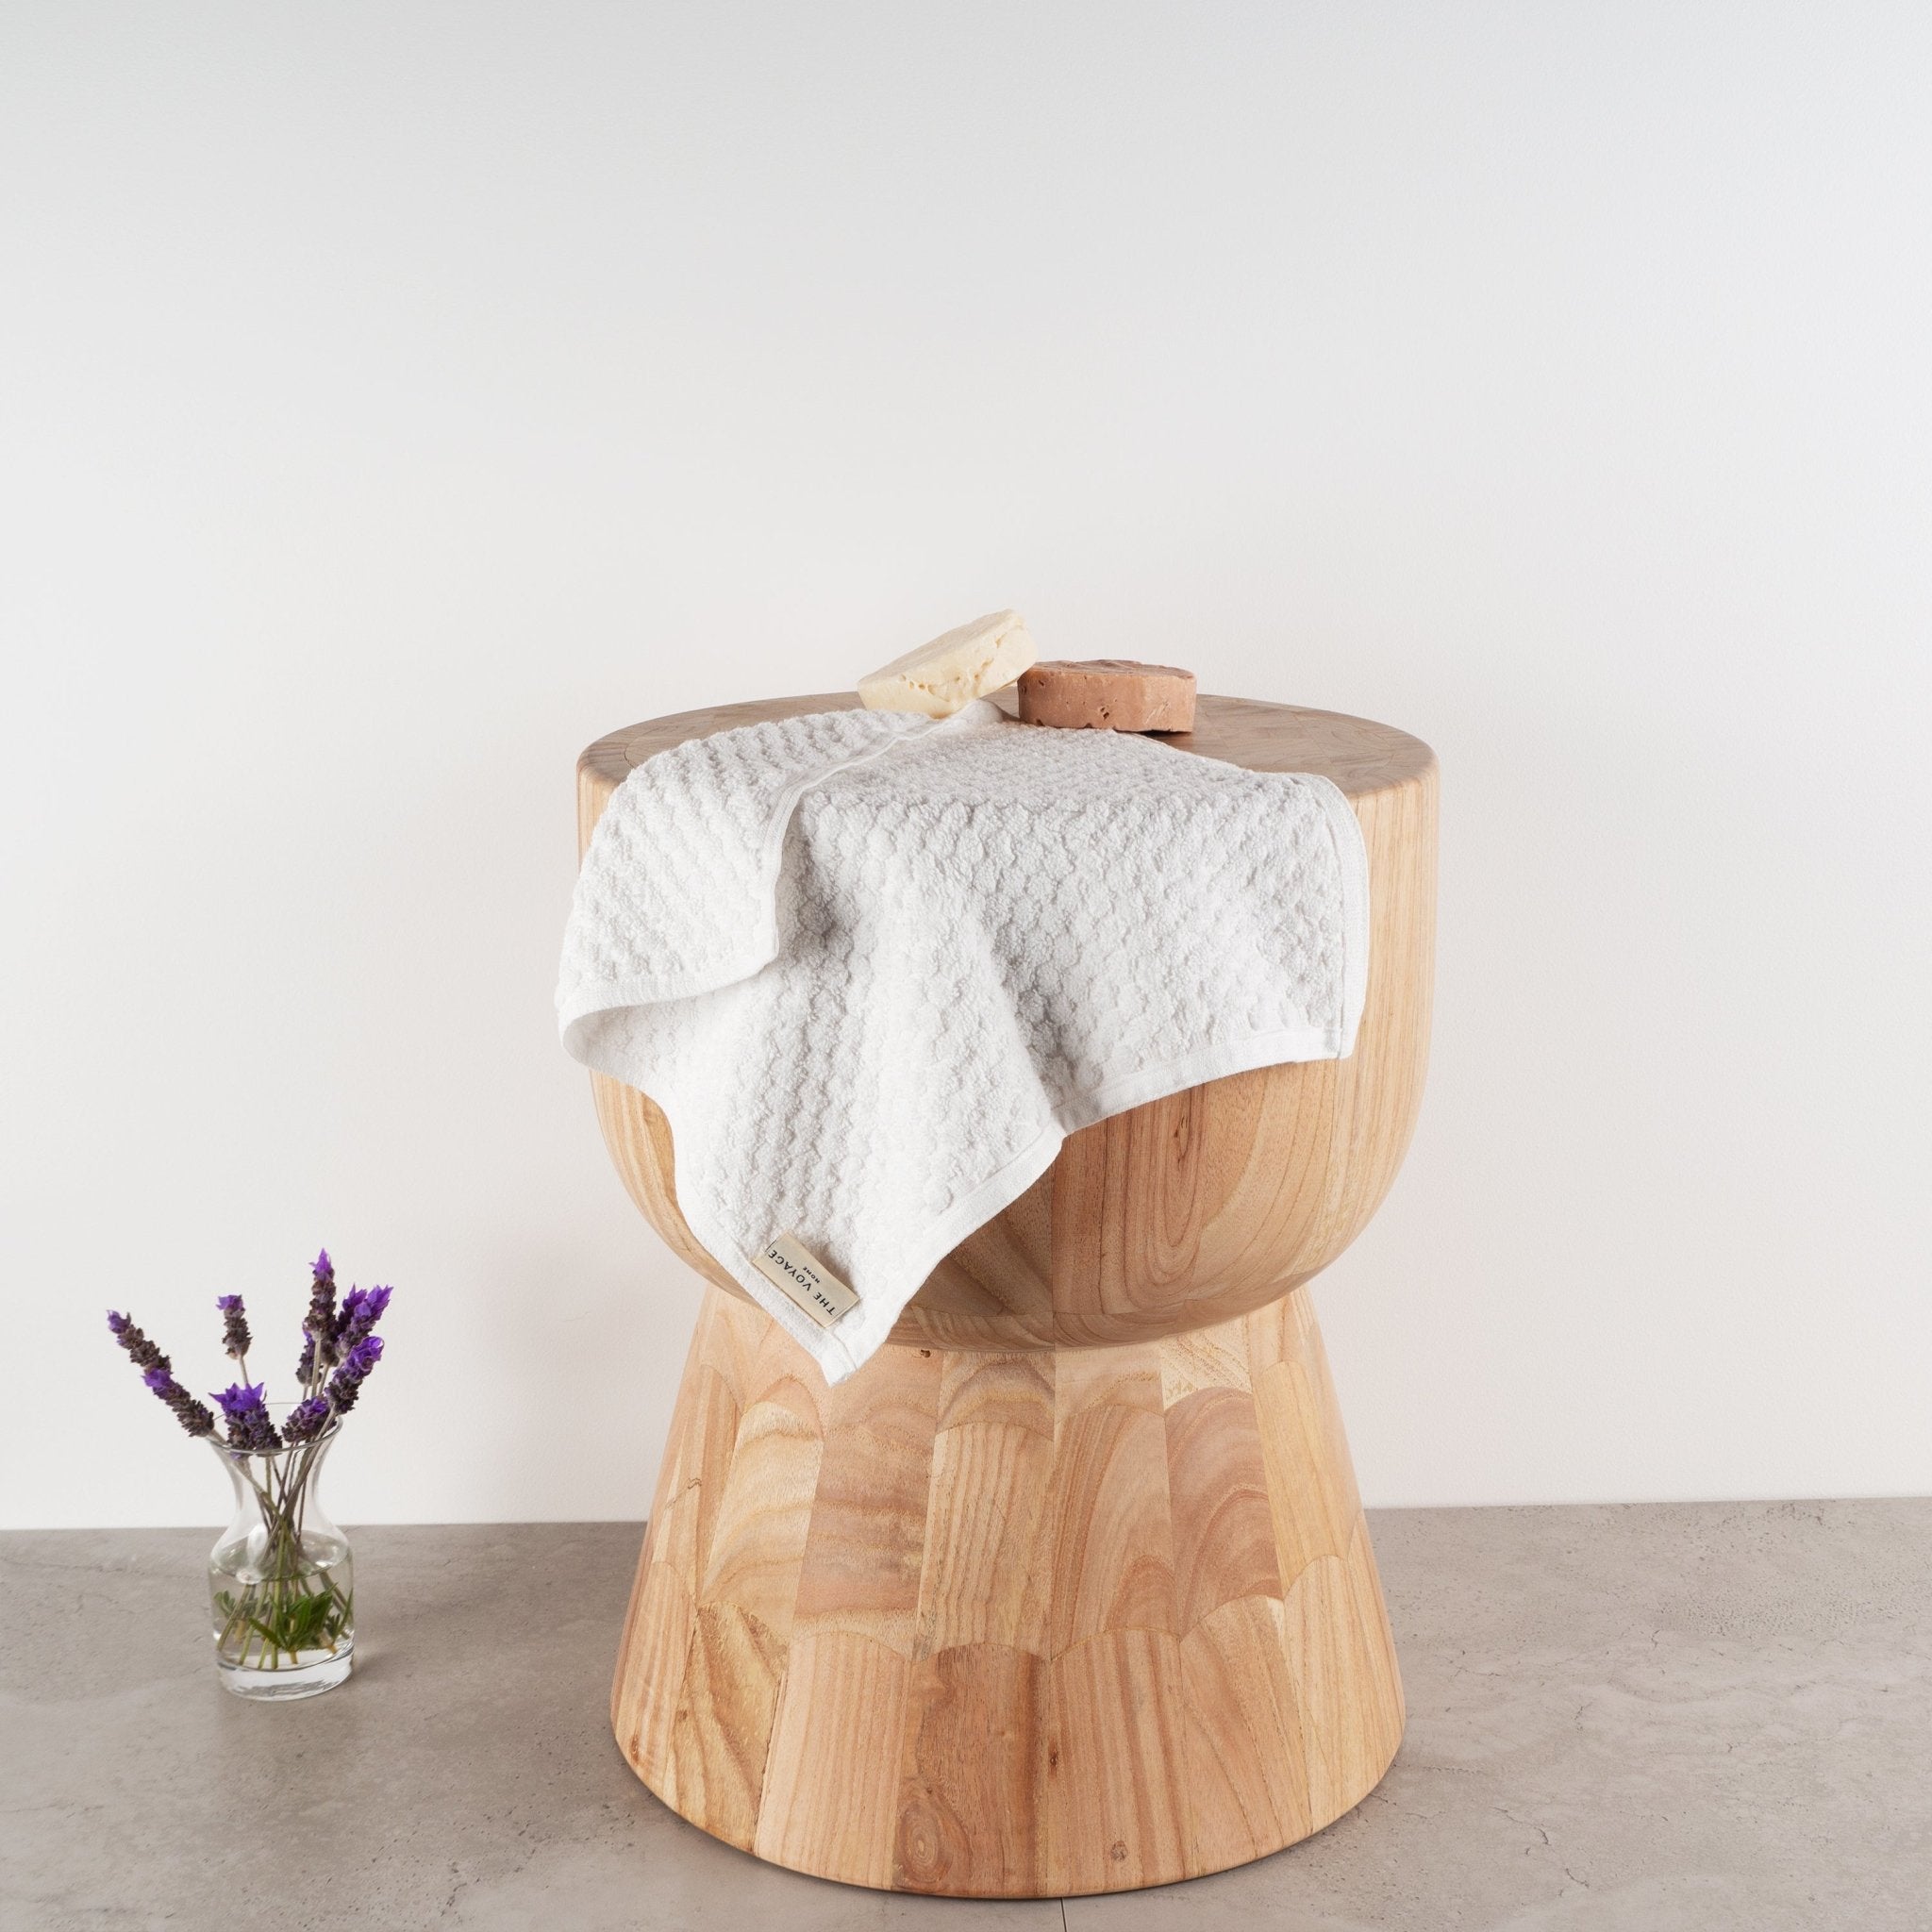 Handloomed organic cotton Turkish face towel in white grid pattern draped over wooden stump with lavender